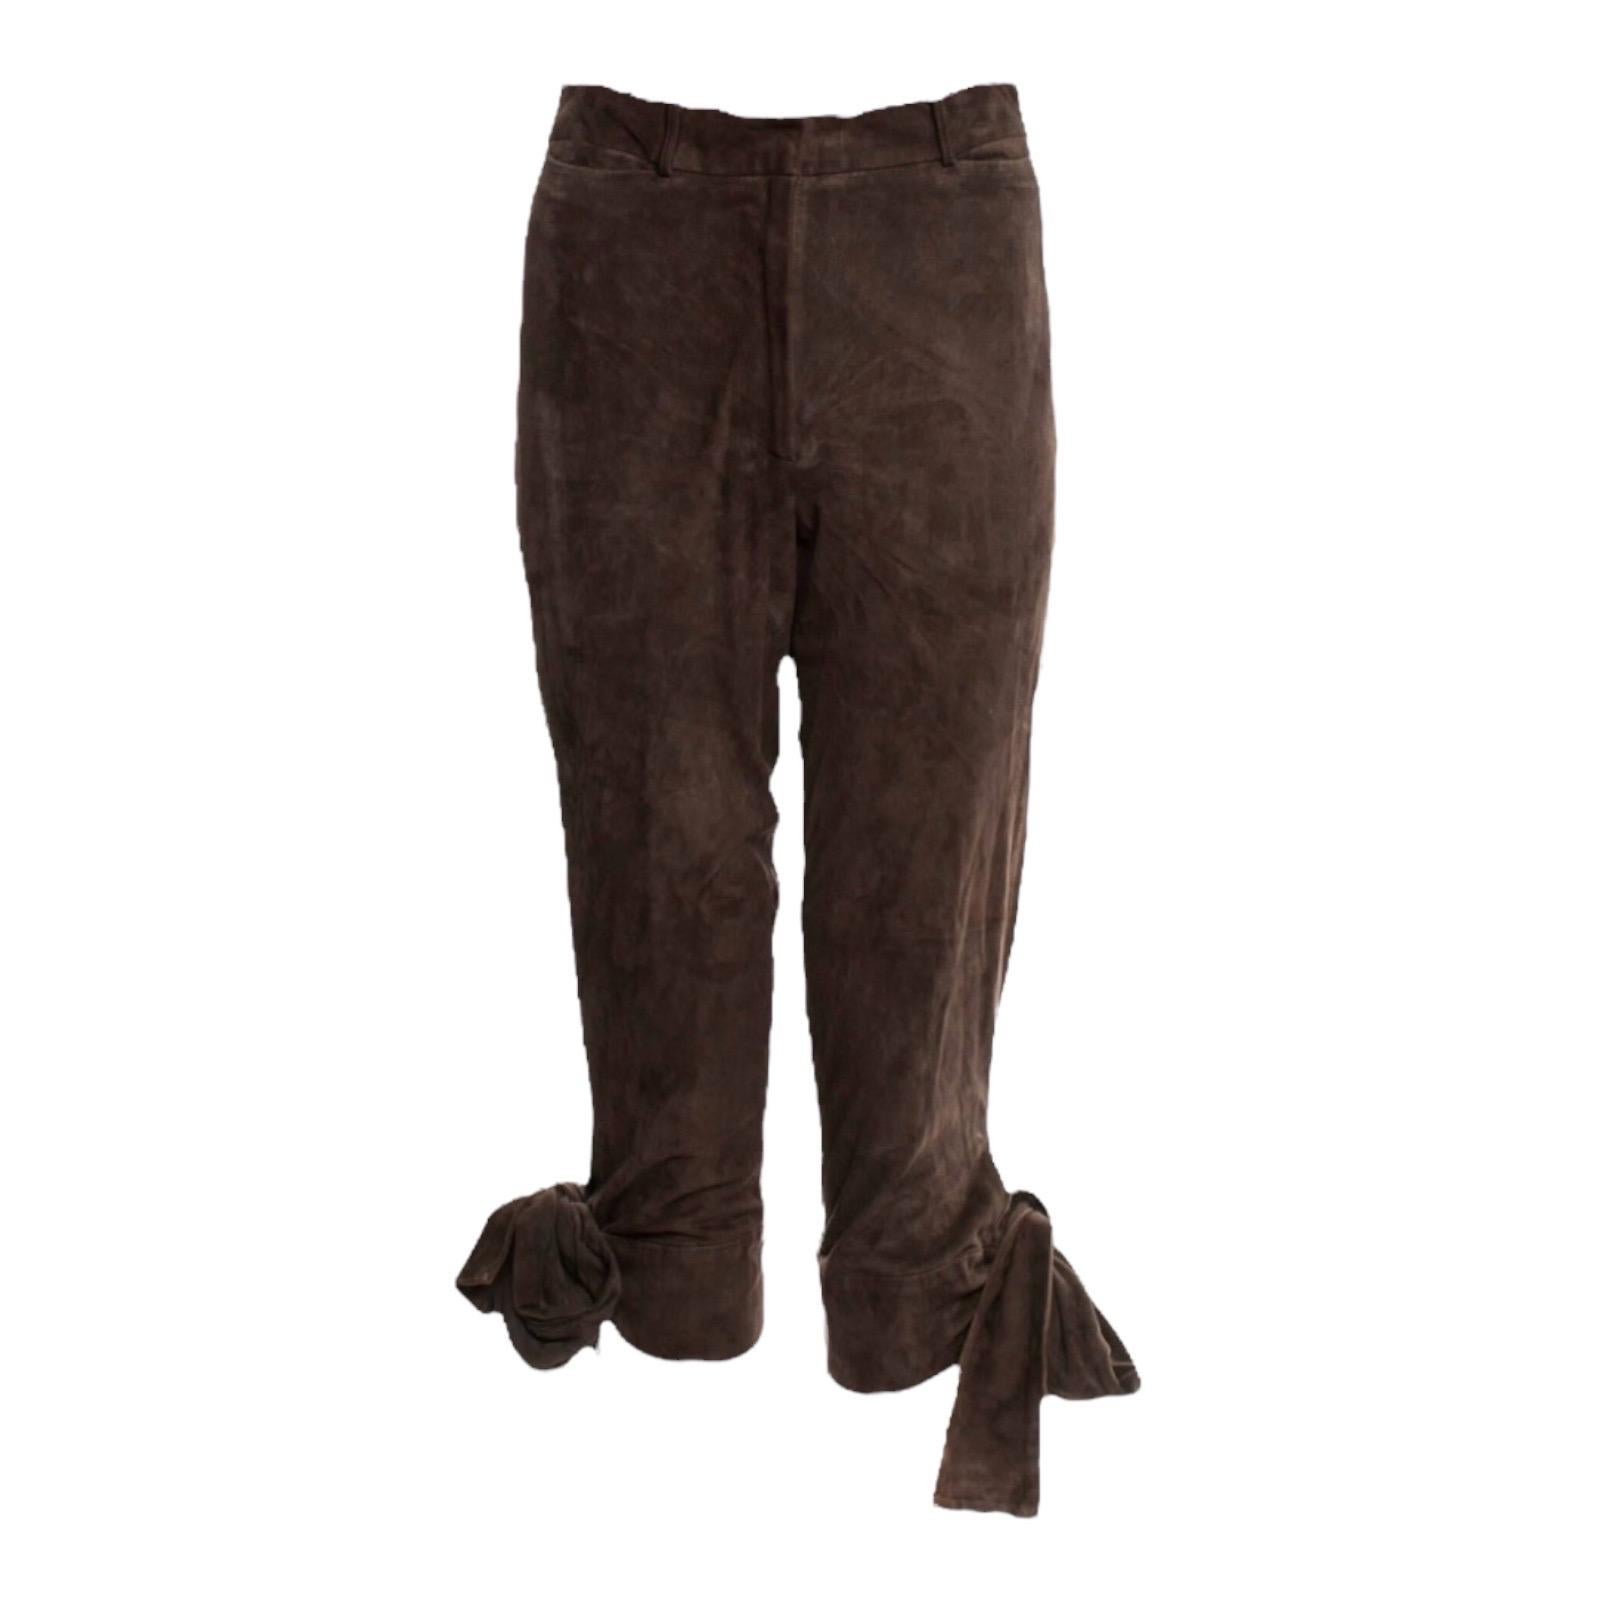 NEW Yves Saint Laurent Tom Ford 2002 Brown Leather Bow-Tie "Pirate" Pants 38